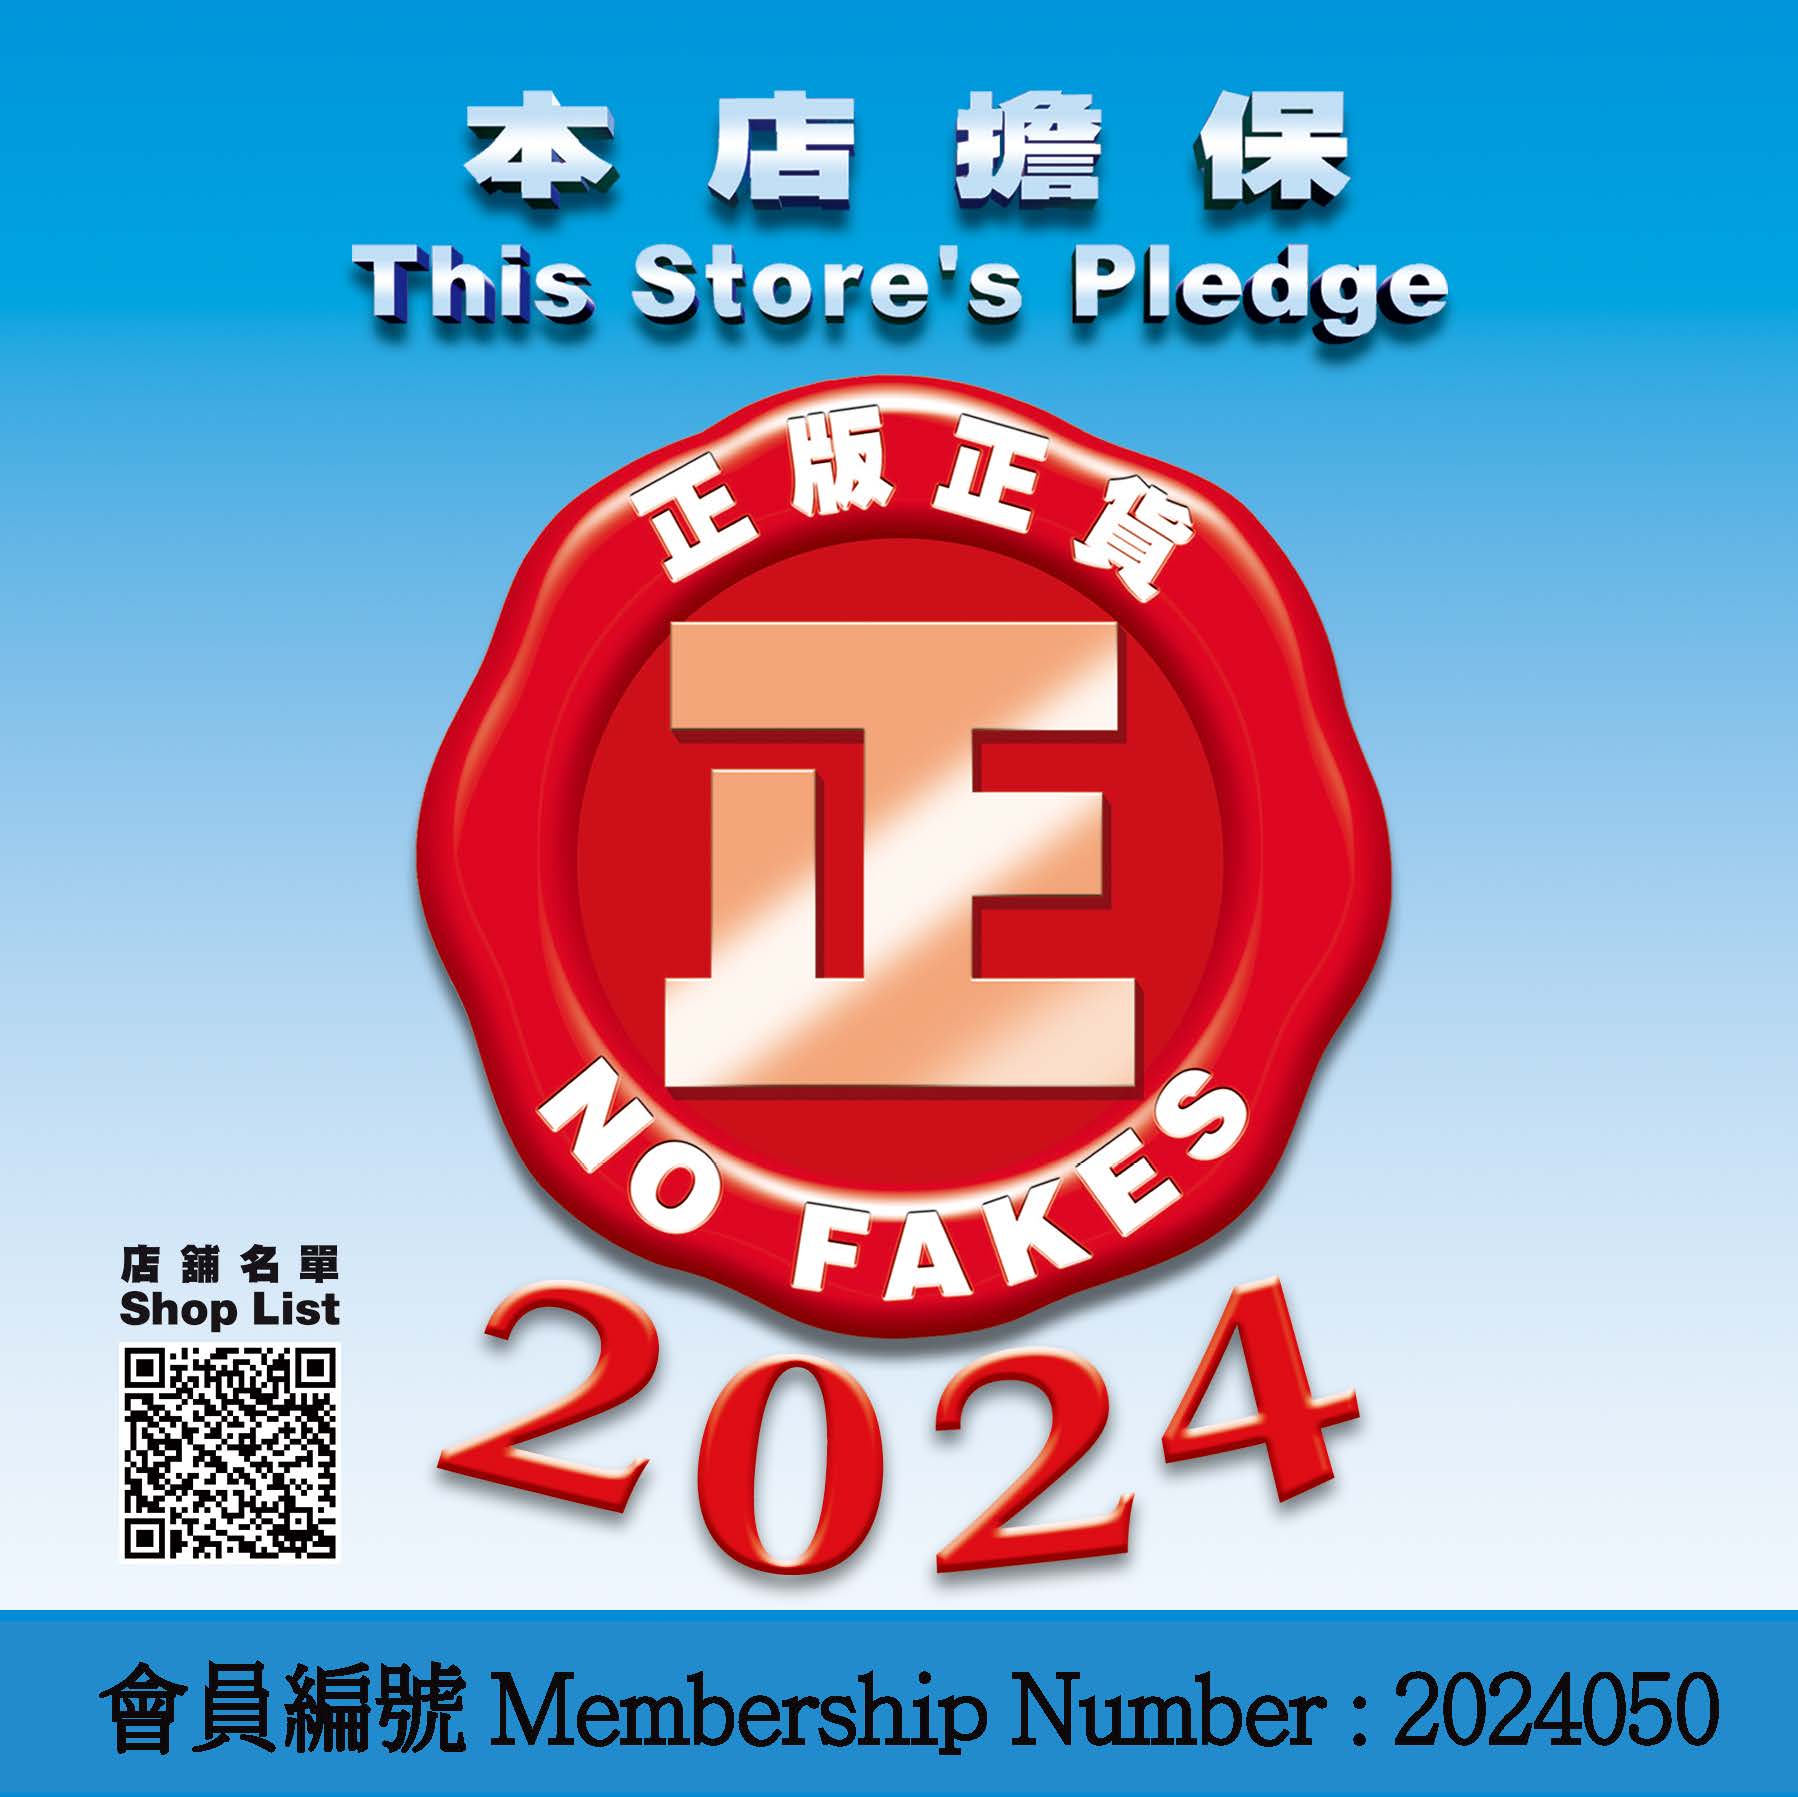 “No Fakes Pledge” Scheme by the Intellectual Property Department